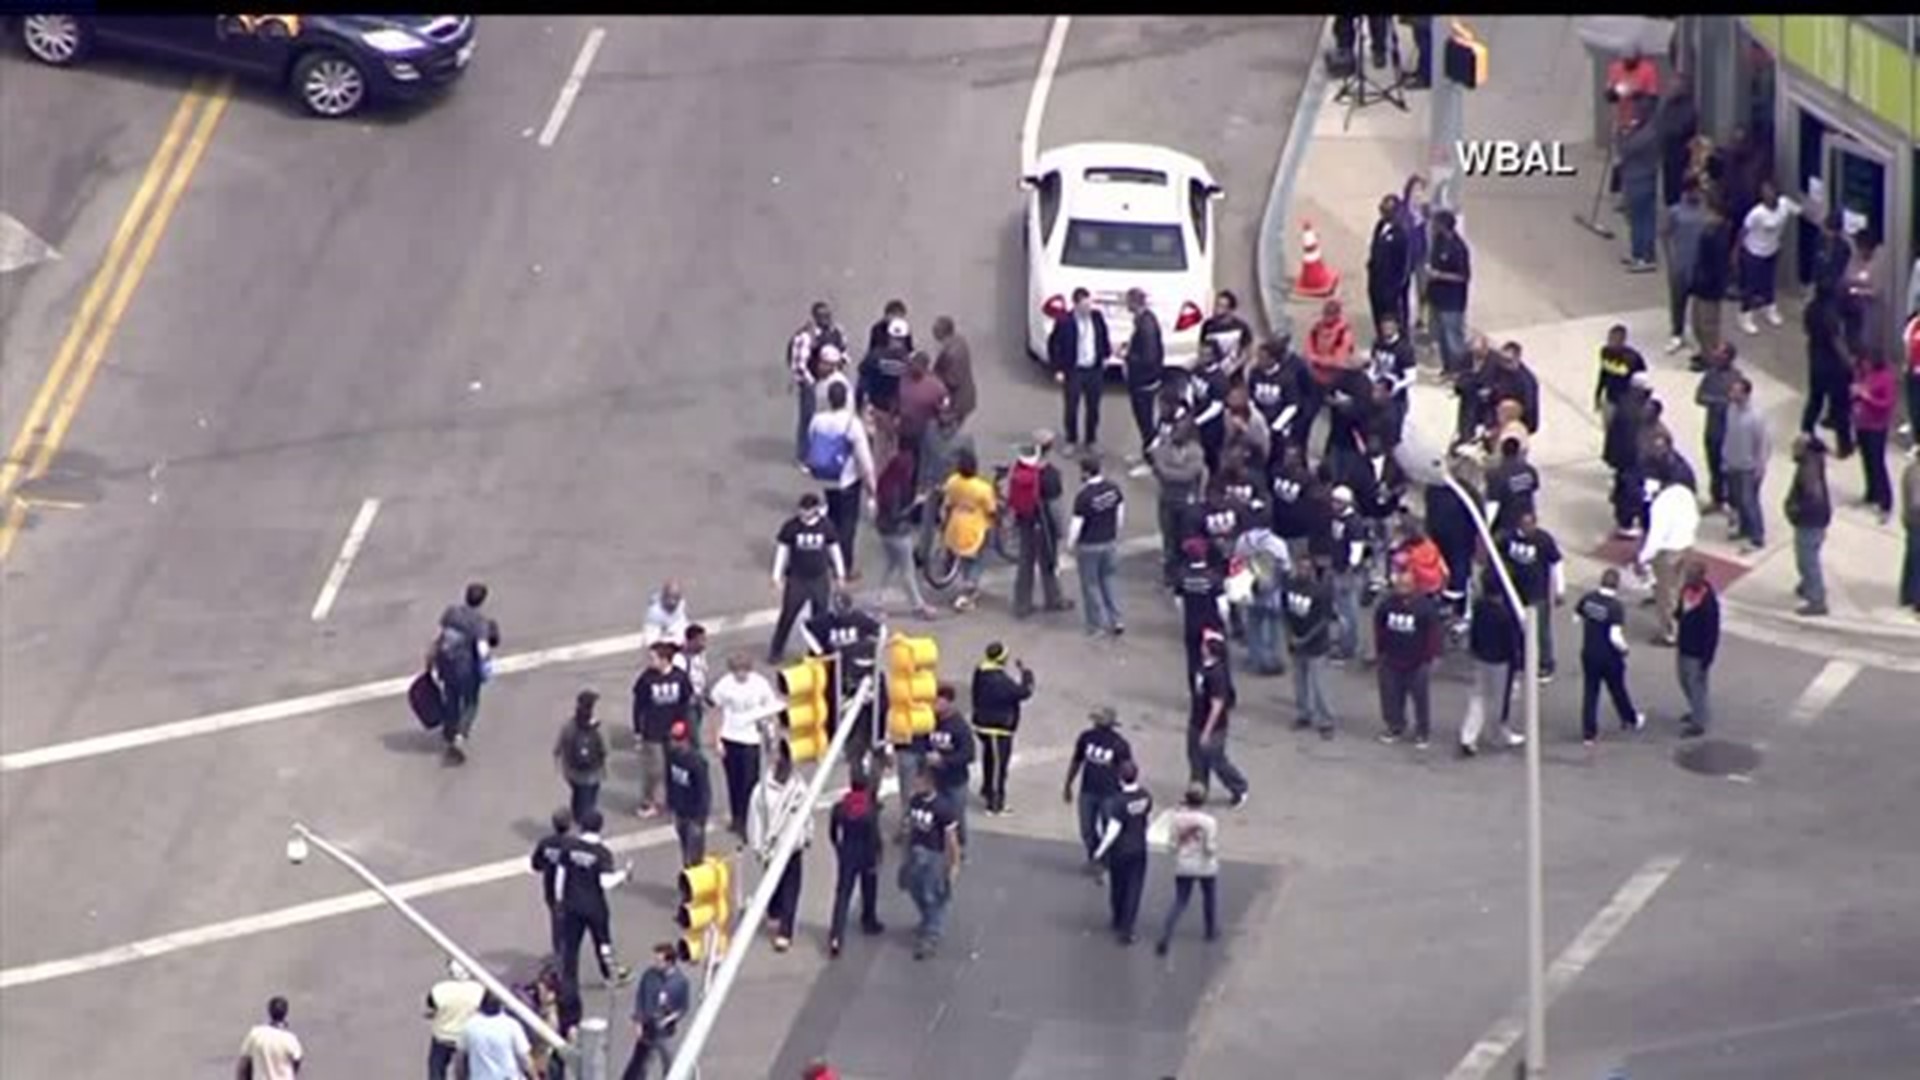 Latest on protest in Baltimore